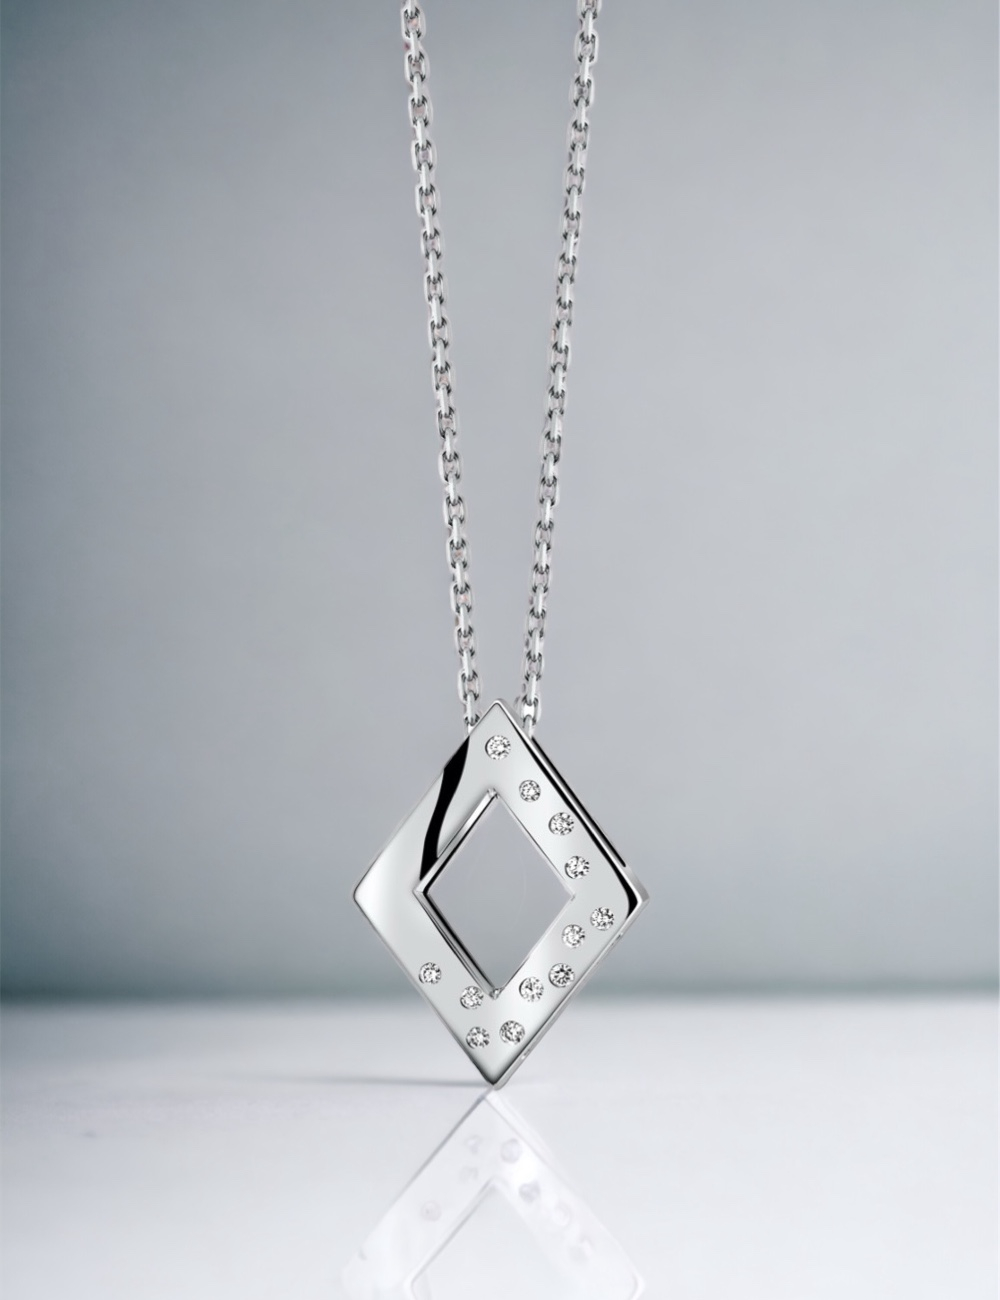 A women's pendant in a diamond shape, made of gold and adorned with white diamonds, suitable for everyday wear.